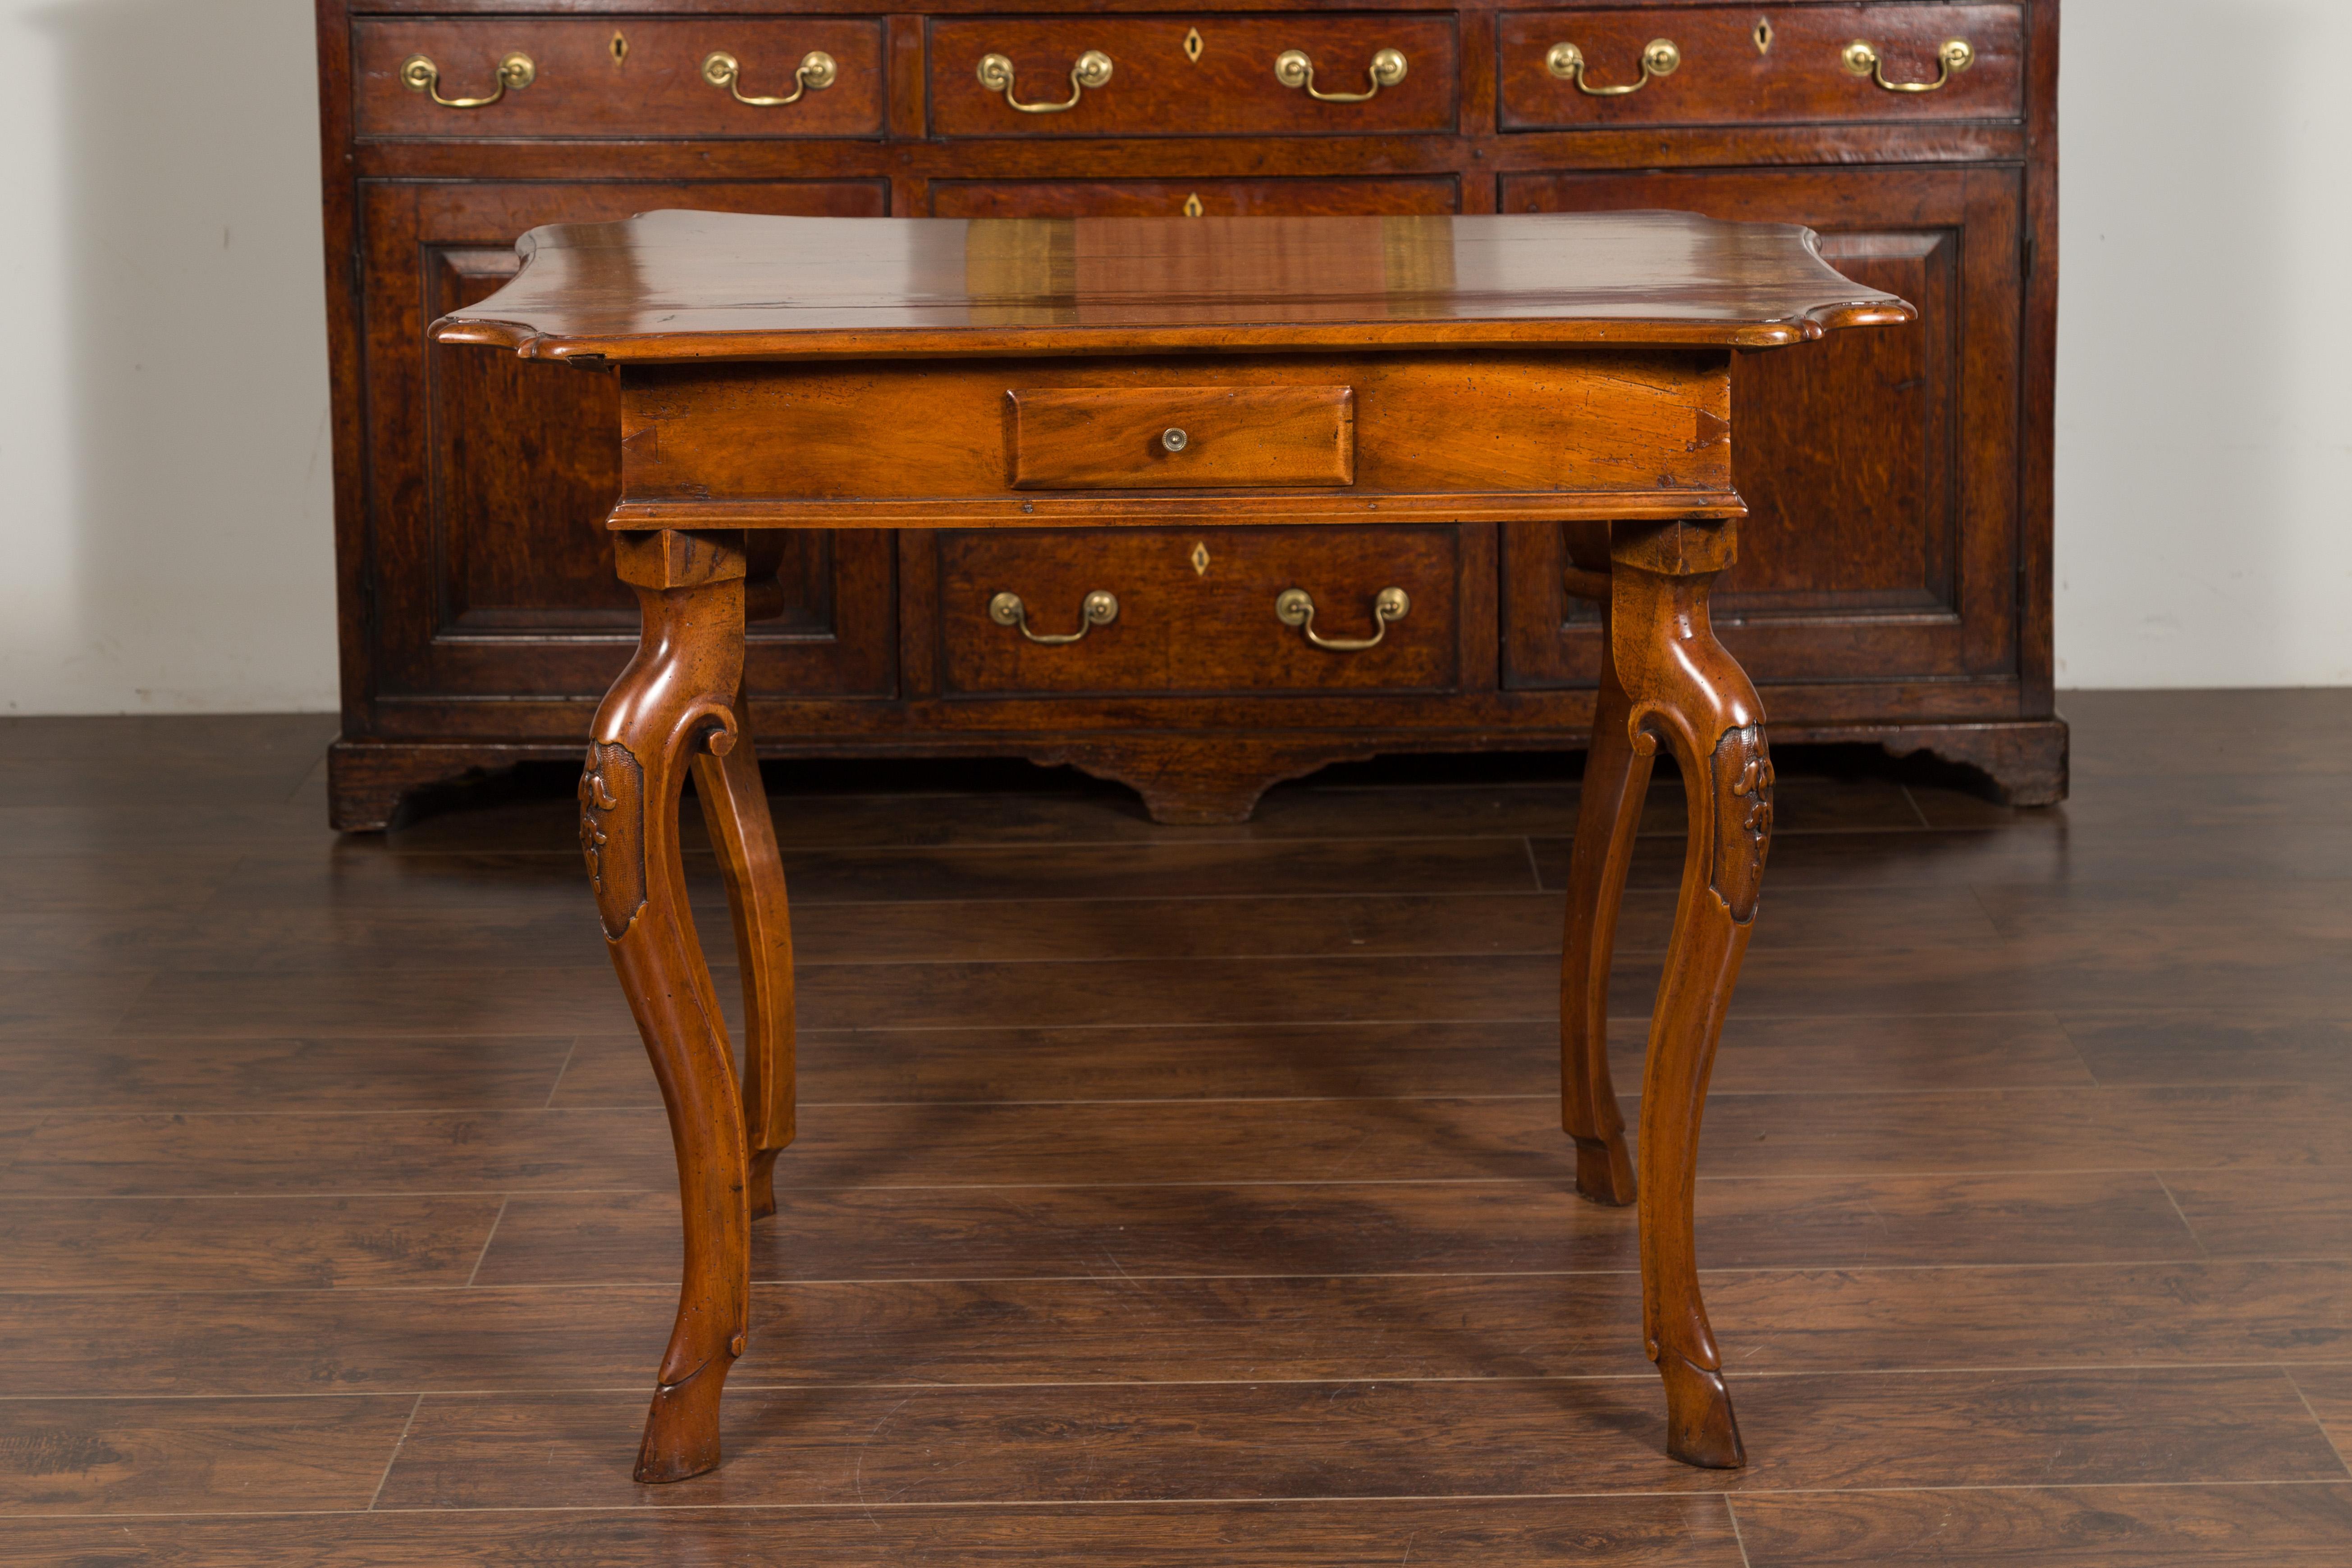 A Northern Italian Régence period walnut side table from the early 18th century, with four drawers, cabriole legs, hoofed feet and carved foliage. Created in Northern Italy during the first quarter of the 18th century, this walnut side table